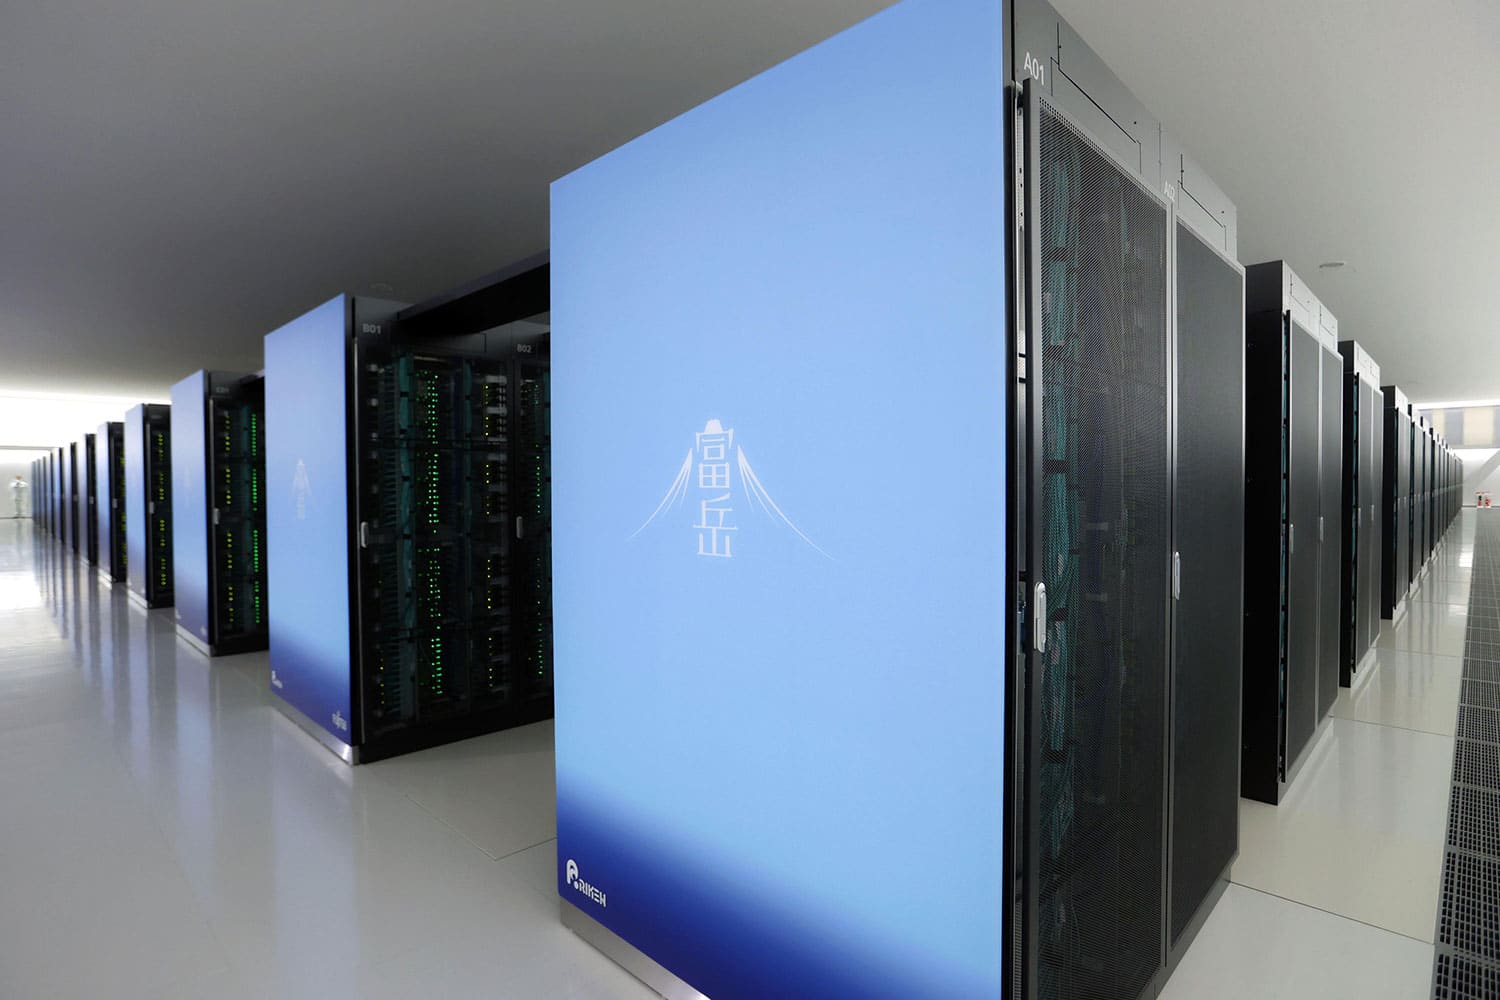 Fugaku is now the most powerful supercomputer in the world.